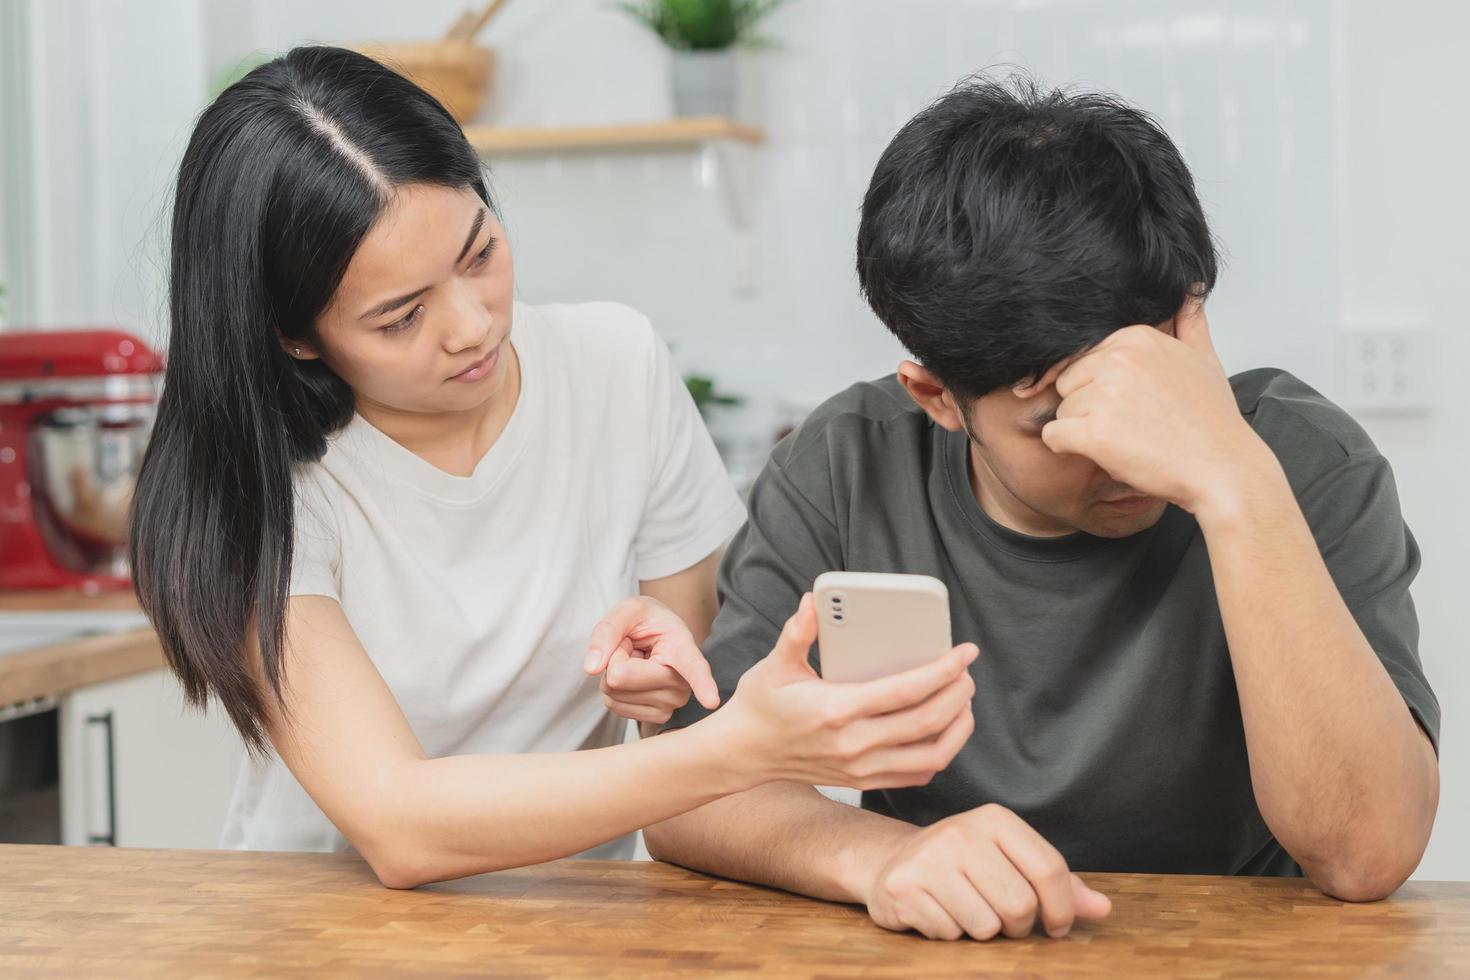 Infidelity, suspicion asian young couple love fight relationship, wife holding cellphone, smartphone cheating on phone, scolding husband about mistrust, distrust and jealousy when sitting at home. photo